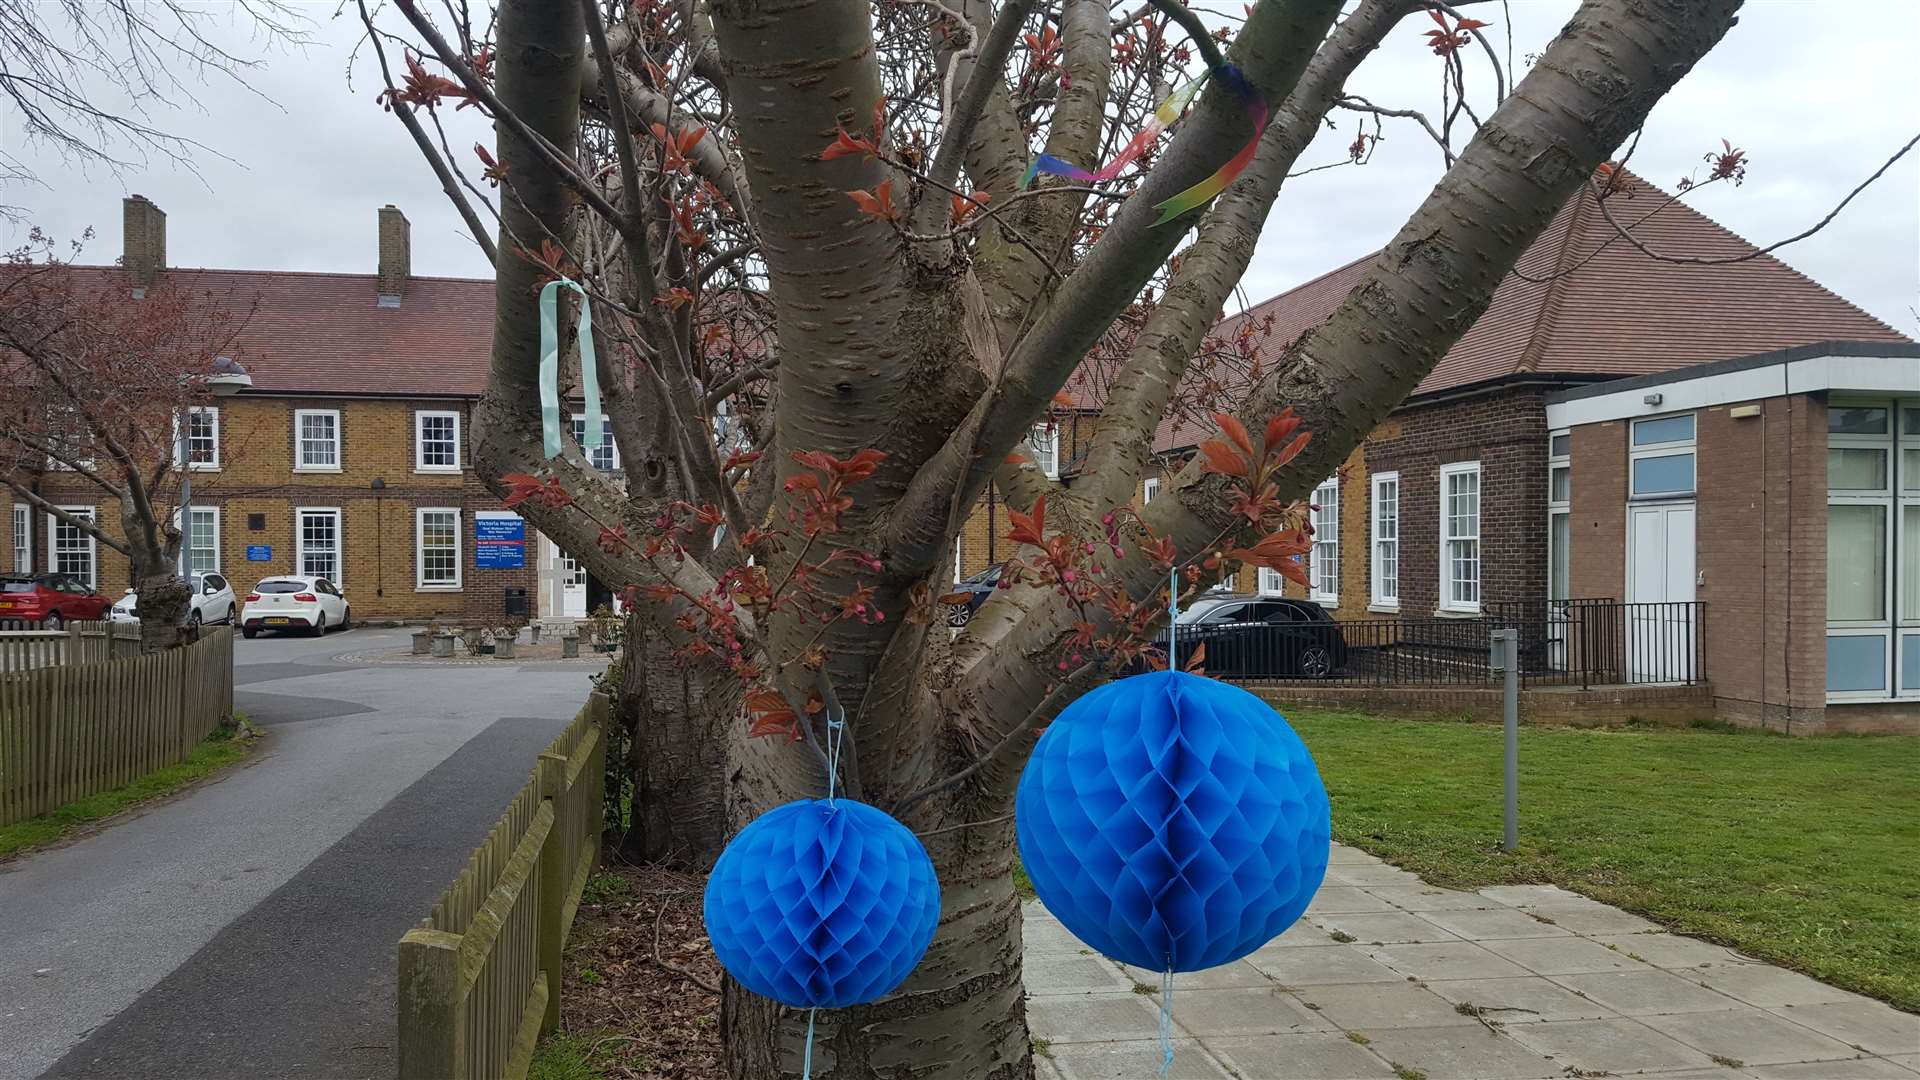 The blue decorations adorn the entrance to Deal Hospital Picture: Jim Wheeler